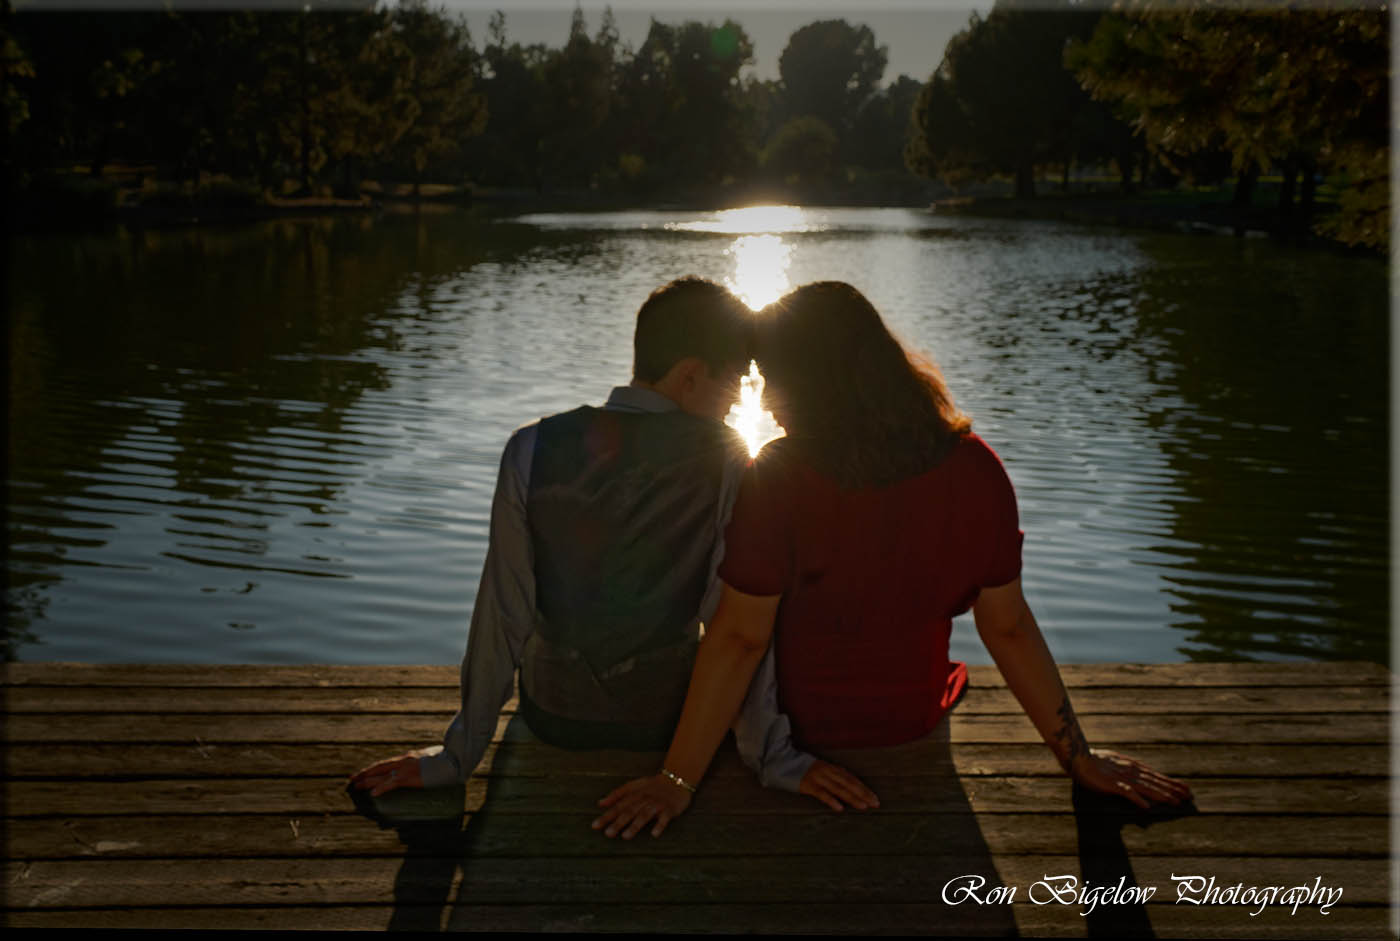 Ron Bigelow Photography - Engagement Image 7